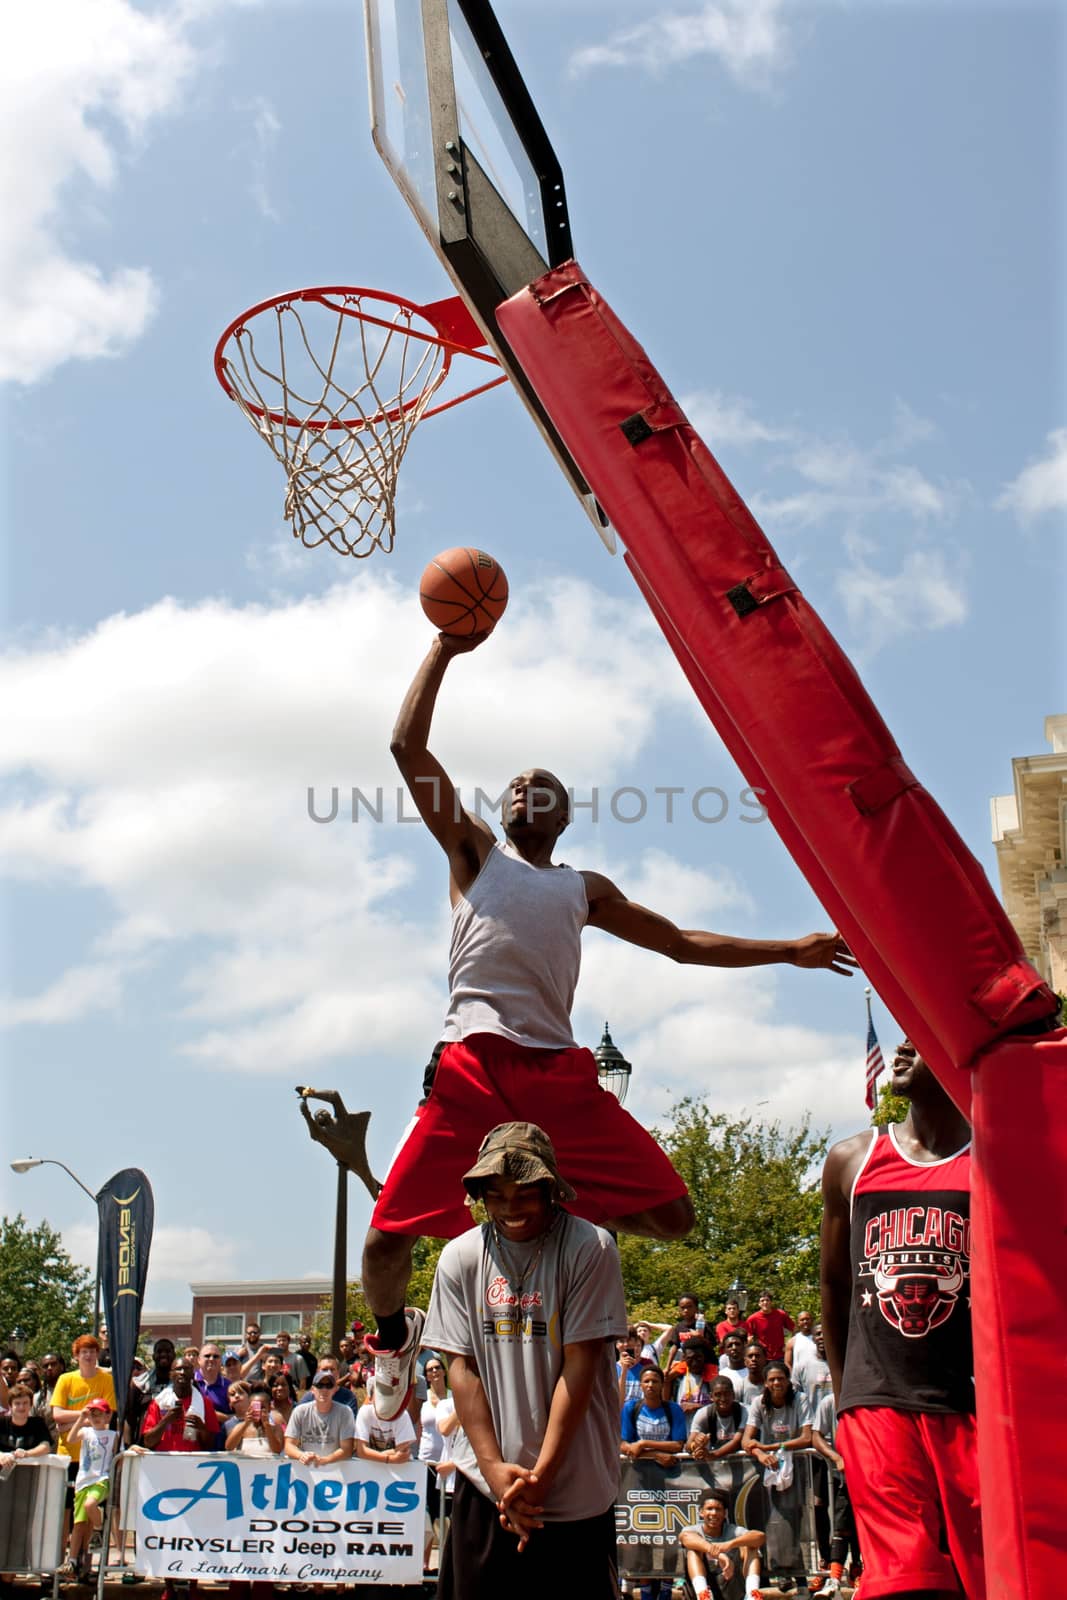 Man Jumps Over A Person To Dunk In Outdoor Contest by BluIz60